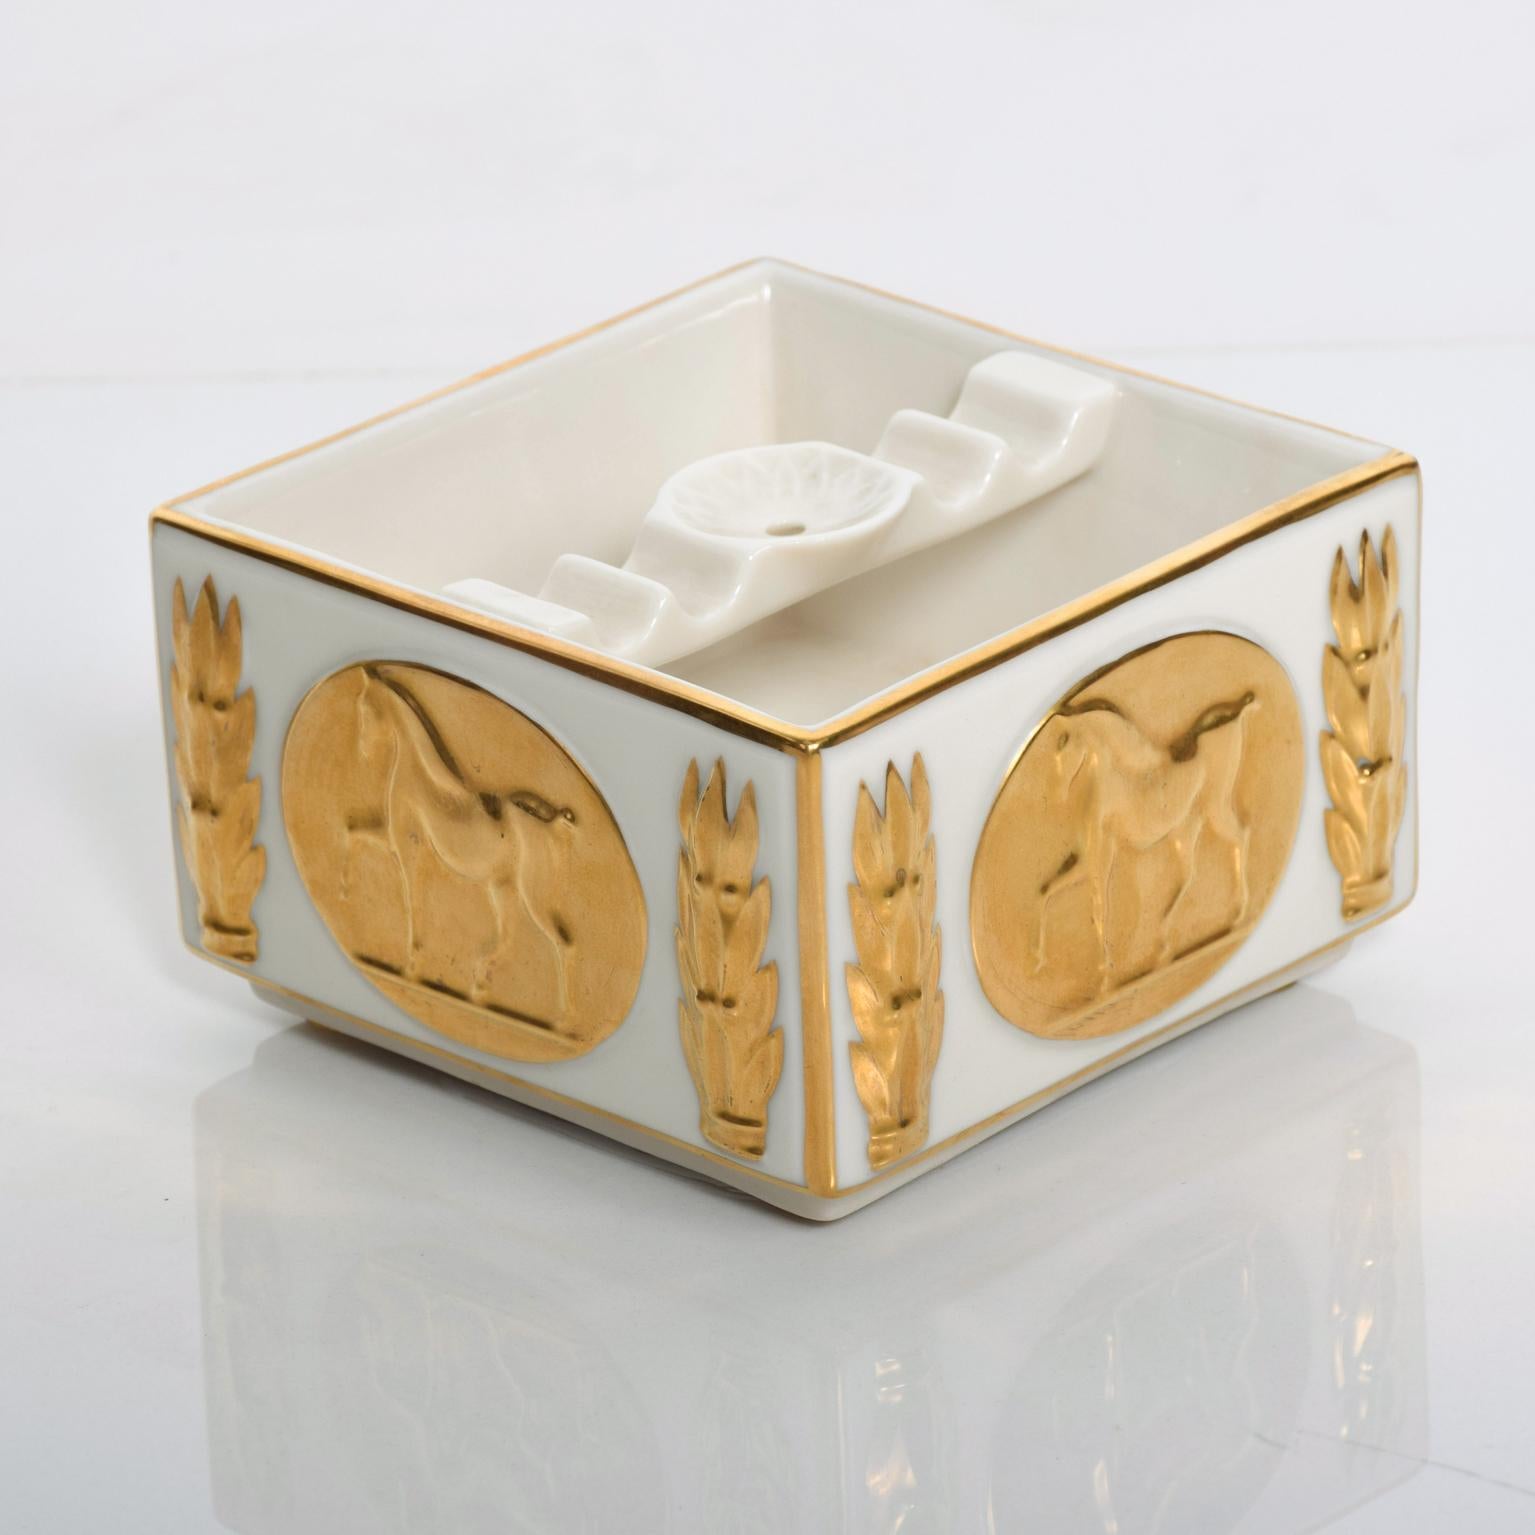 For your consideration a Mid Century Modern LENOX Vintage AshTray in Porcelain and Gold. Original Very Good Vintage Condition. Golden Stallion by LENOX Designer's Collection 1960's Please see images. Dimensions: 2 3/4